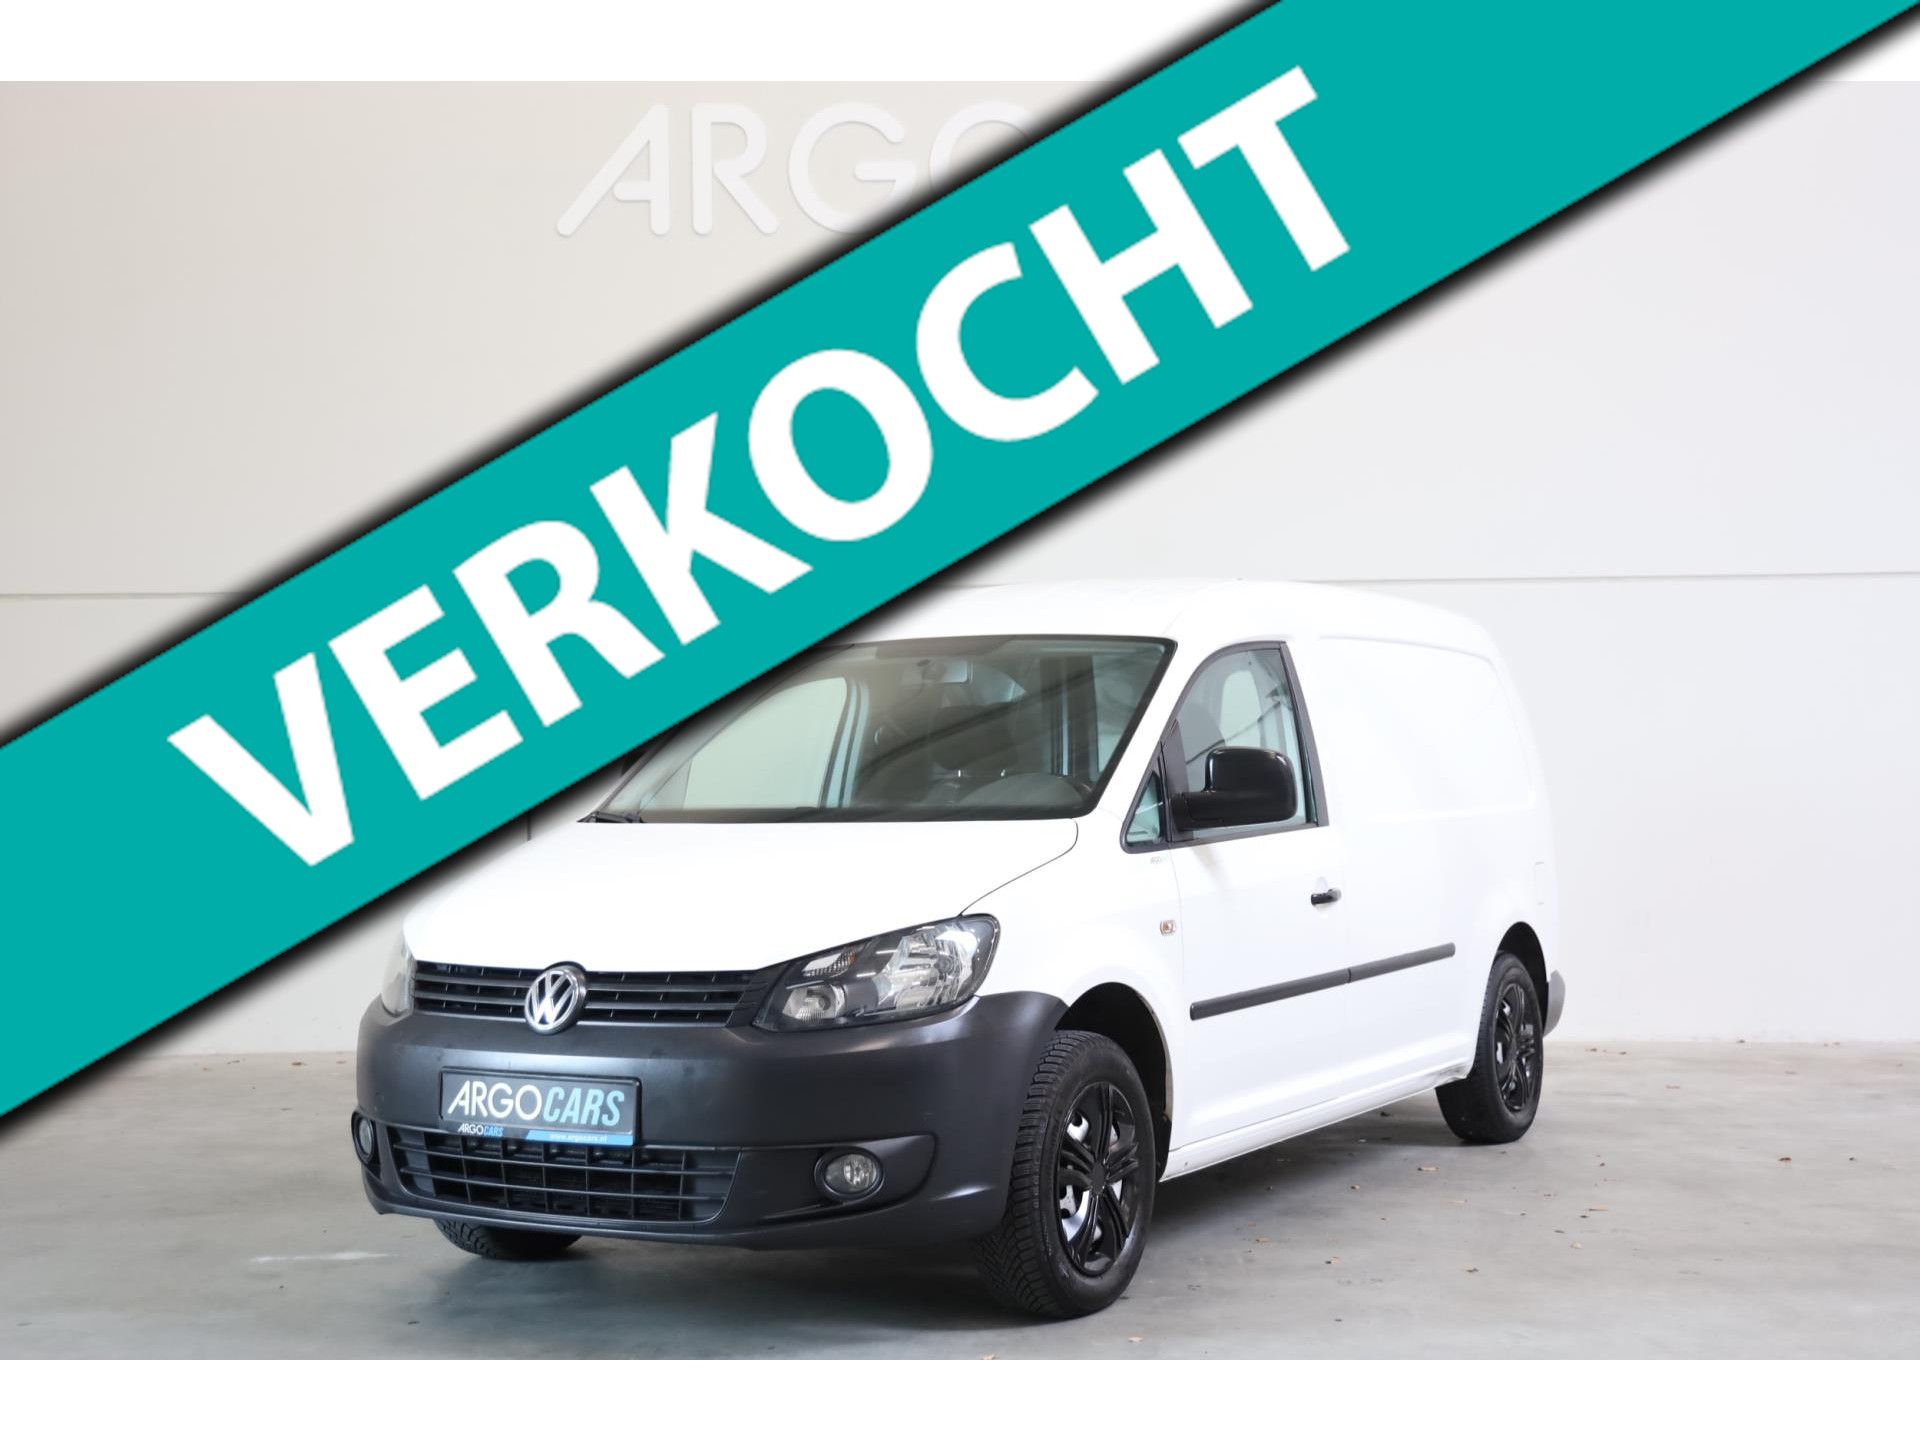 Volkswagen Caddy 1.6 TDI MAXI PDC TREKHAAK AIRCO CRUISE EXTRA LANG LEASE v/a € 79,- p.m. inruil mogelijk Bestelauto